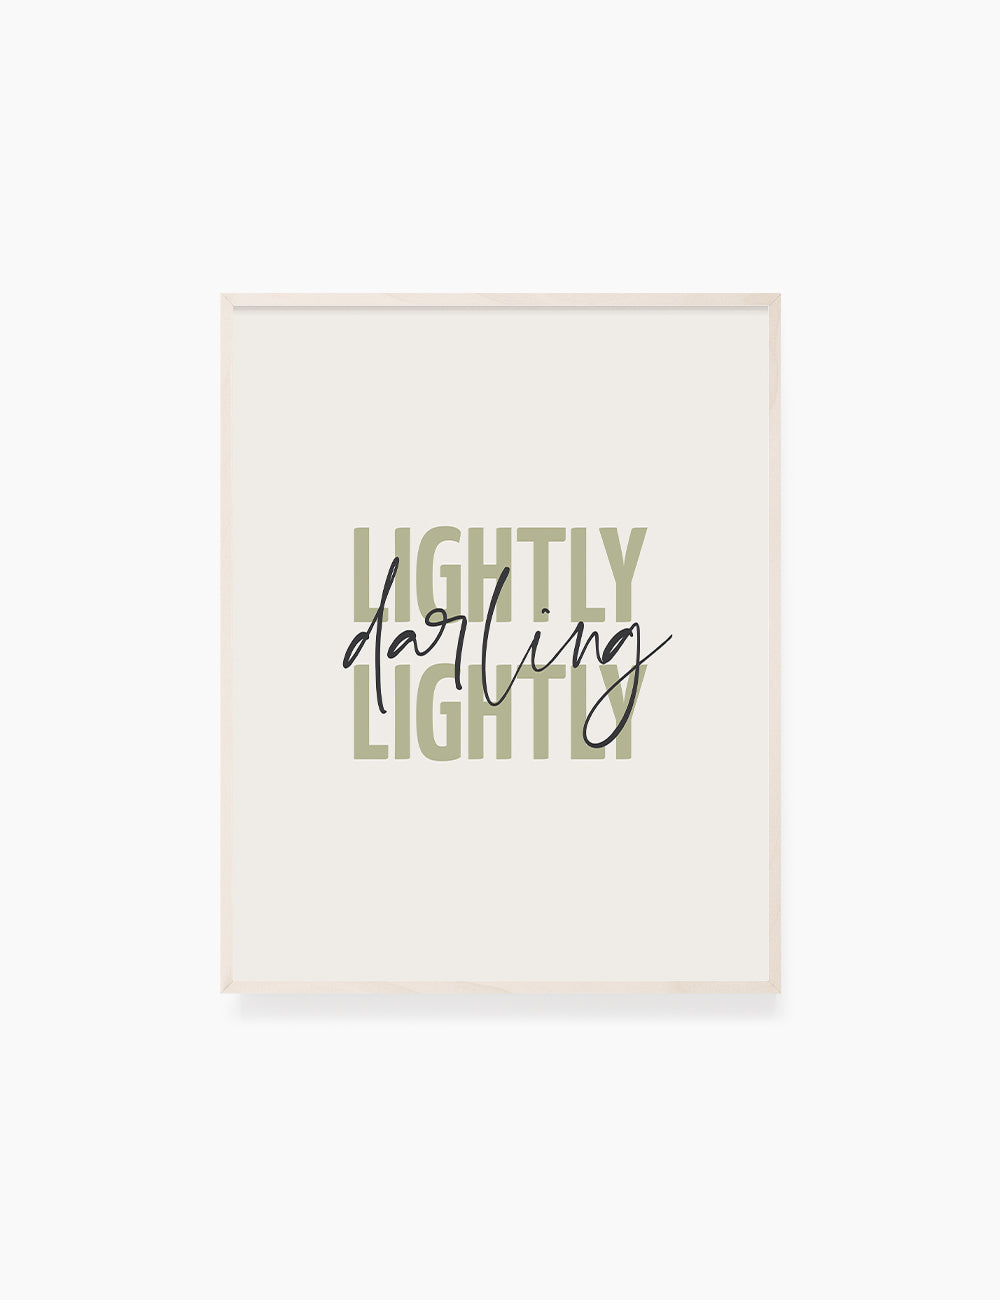 LIGHTLY, DARLING, LIGHTLY. Green. Inspirational quote. Words to live by. Printable Wall Art Quote.  - PAPER MOON Art & Design